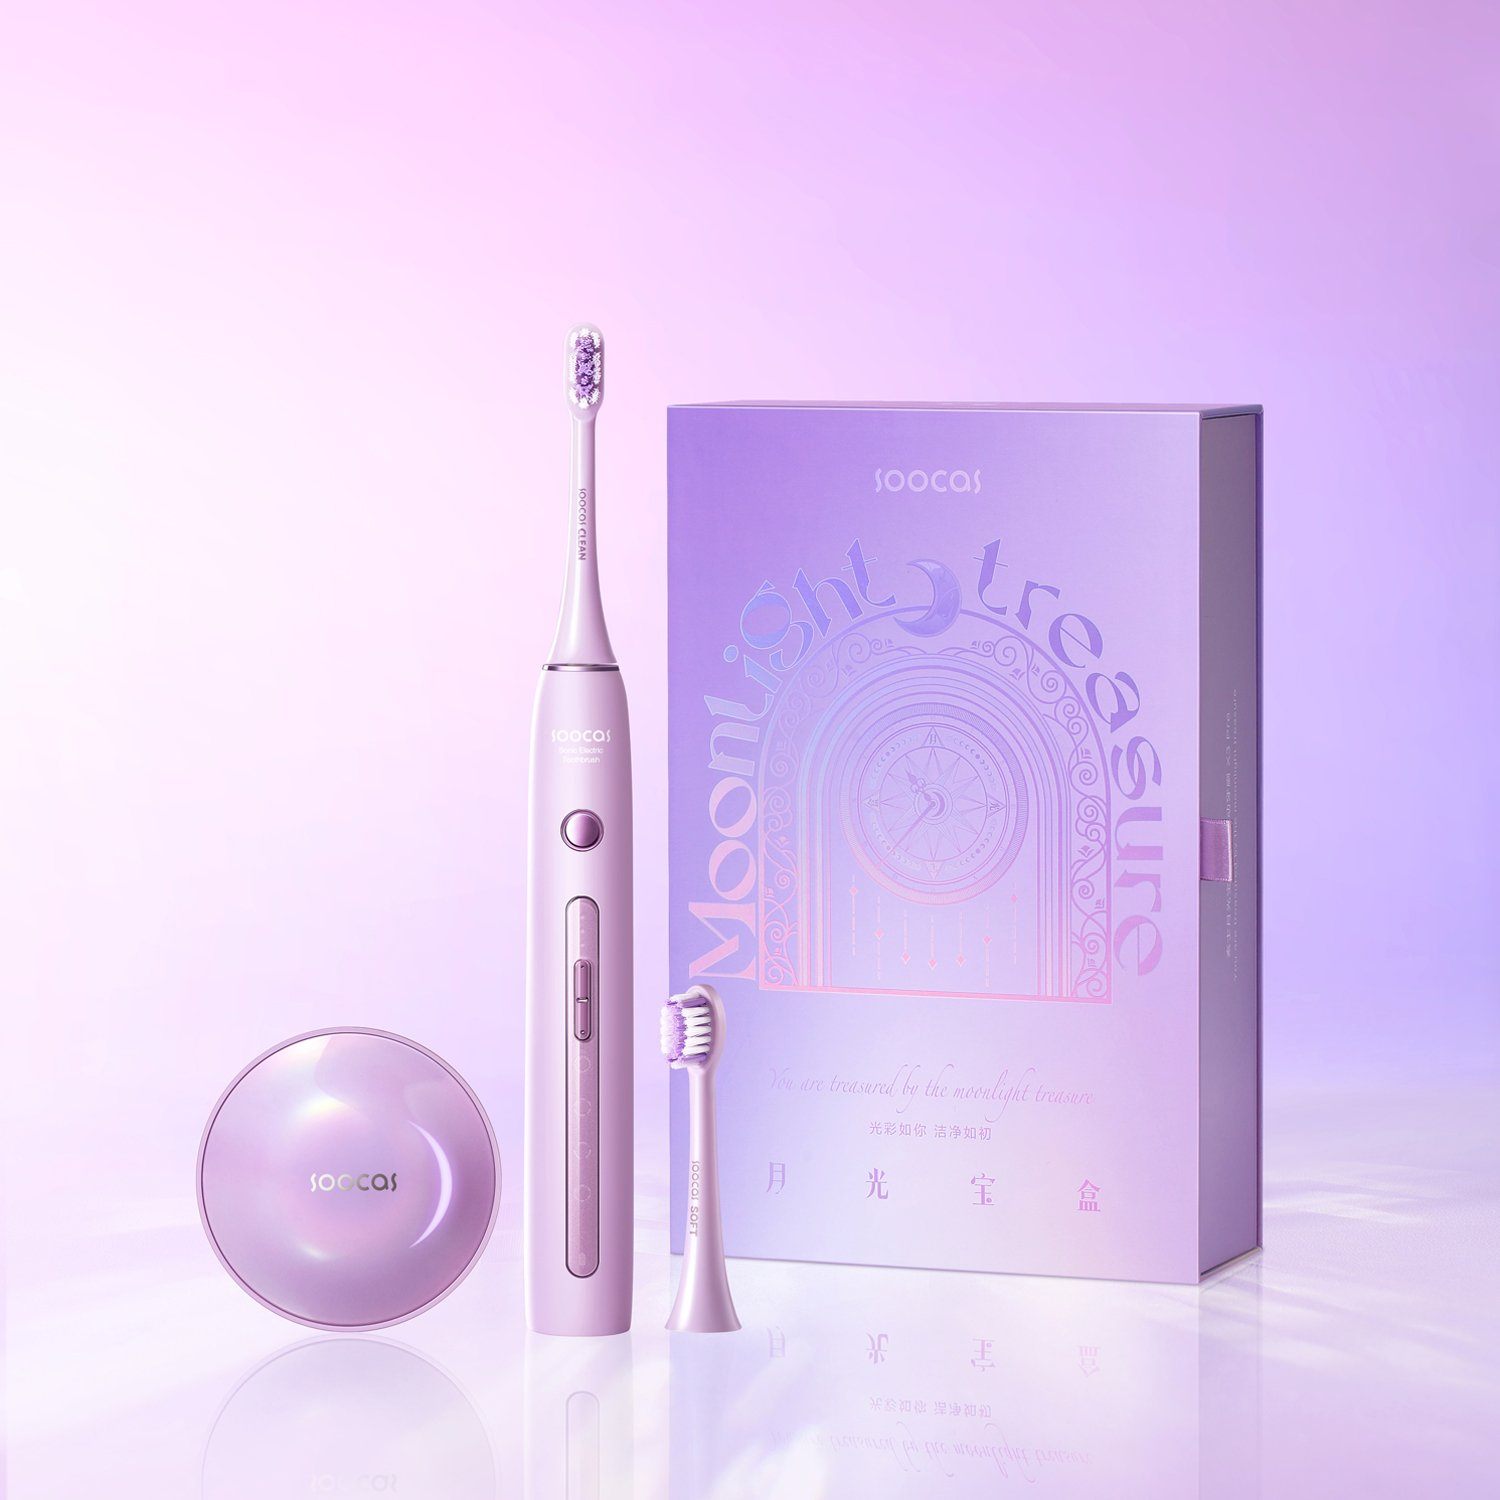 SOOCAS X3Pro Sonic Electric Toothbrush Whitening Sterilization with UVC Disinfection Box Default SOOCAS 